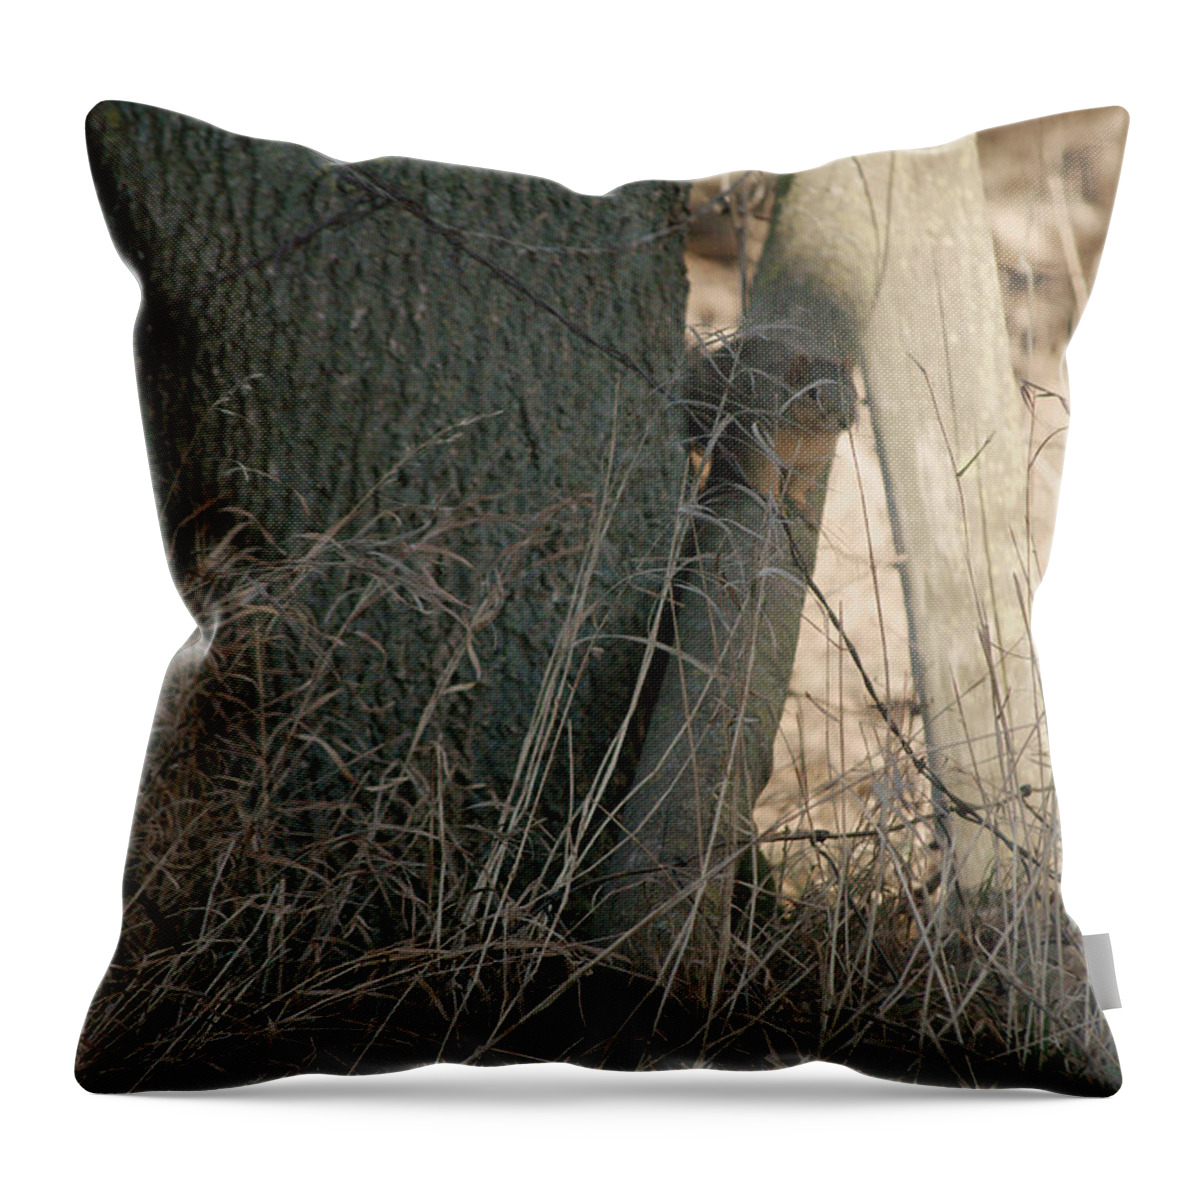 Squirrel Throw Pillow featuring the photograph I see you by Troy Stapek